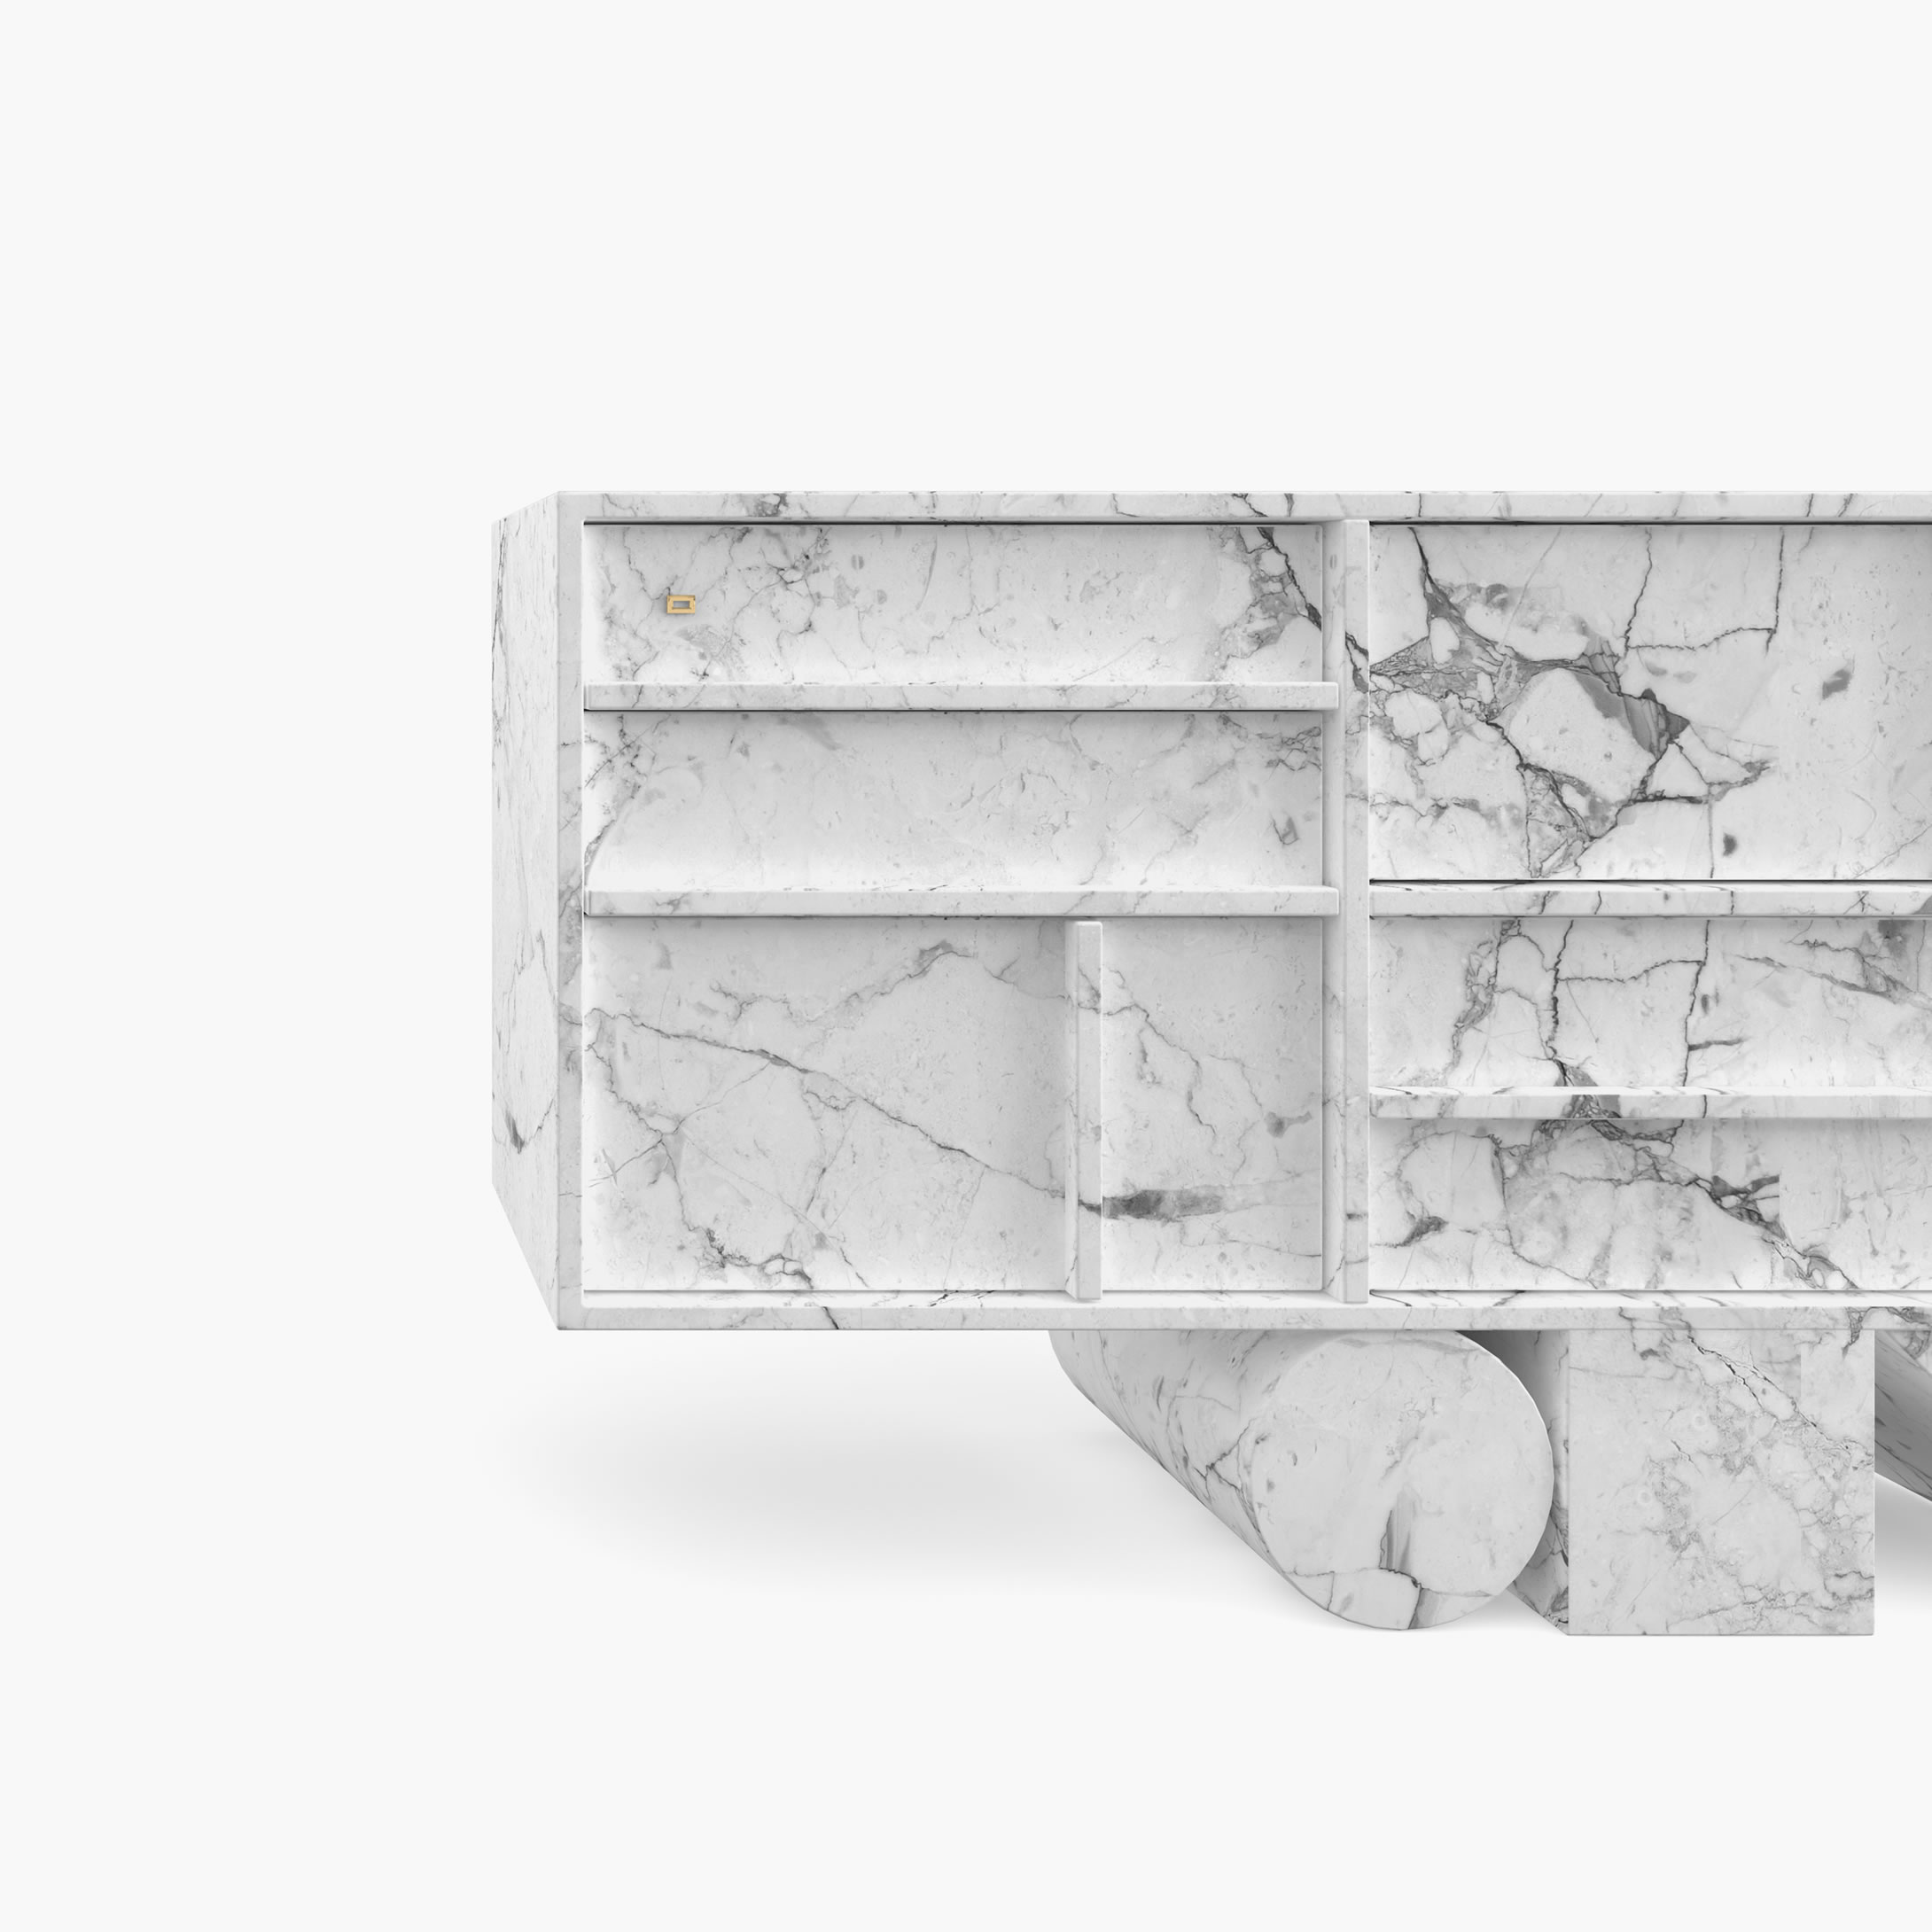 Sideboard Cylinder cuboid prism White Arabescato Marble beautiful Living Room piece of art Consoles  Sideboards FS 17 FELIX SCHWAKE